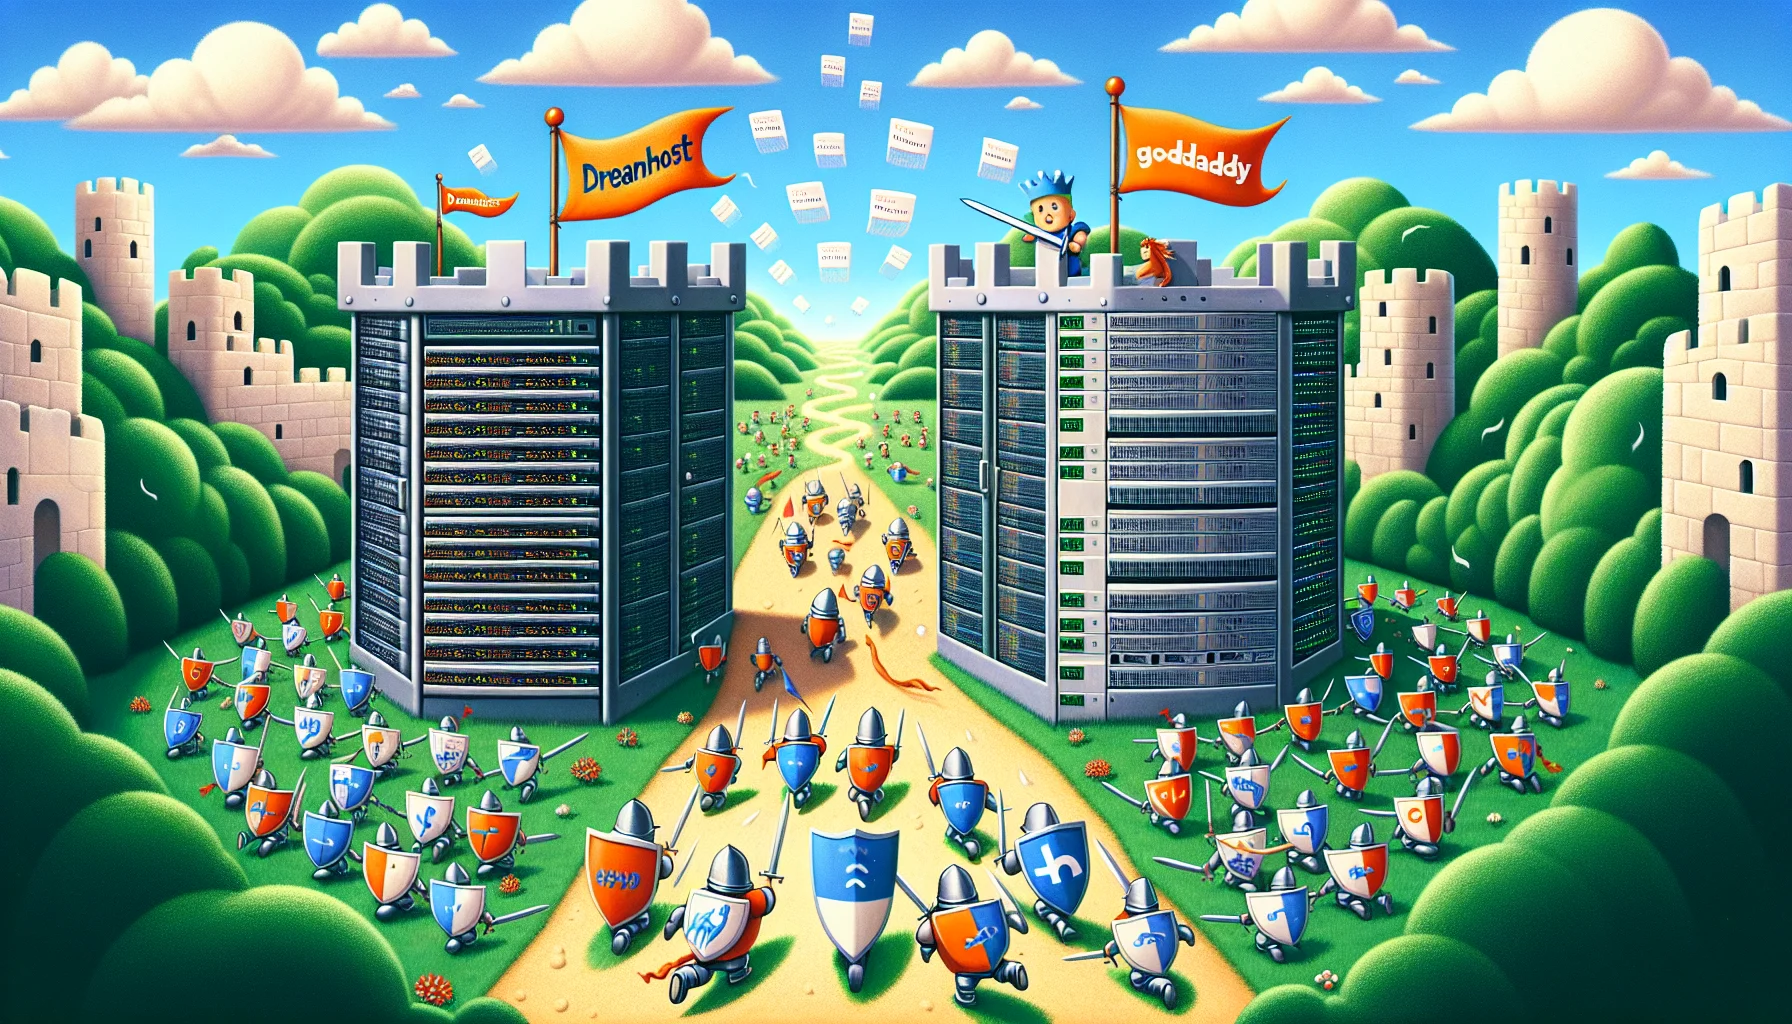 Generate a whimsical picture symbolizing a friendly competition between two web hosting entities. Picture this: a giant server rack in the shape of a medieval castle tagged with a flag reading 'DreamHost', standing on one side of a lush, digital landscape. On the other side, another server castle branded 'GoDaddy'. Between them, a race of data packets, depicted as tiny knights, are scurrying back and forth, carrying shields emblazoned with various web icons. Above them, a sky filled with code snippets float like clouds. This image portrays their rivalry in a light, comical, and visually captivating manner.